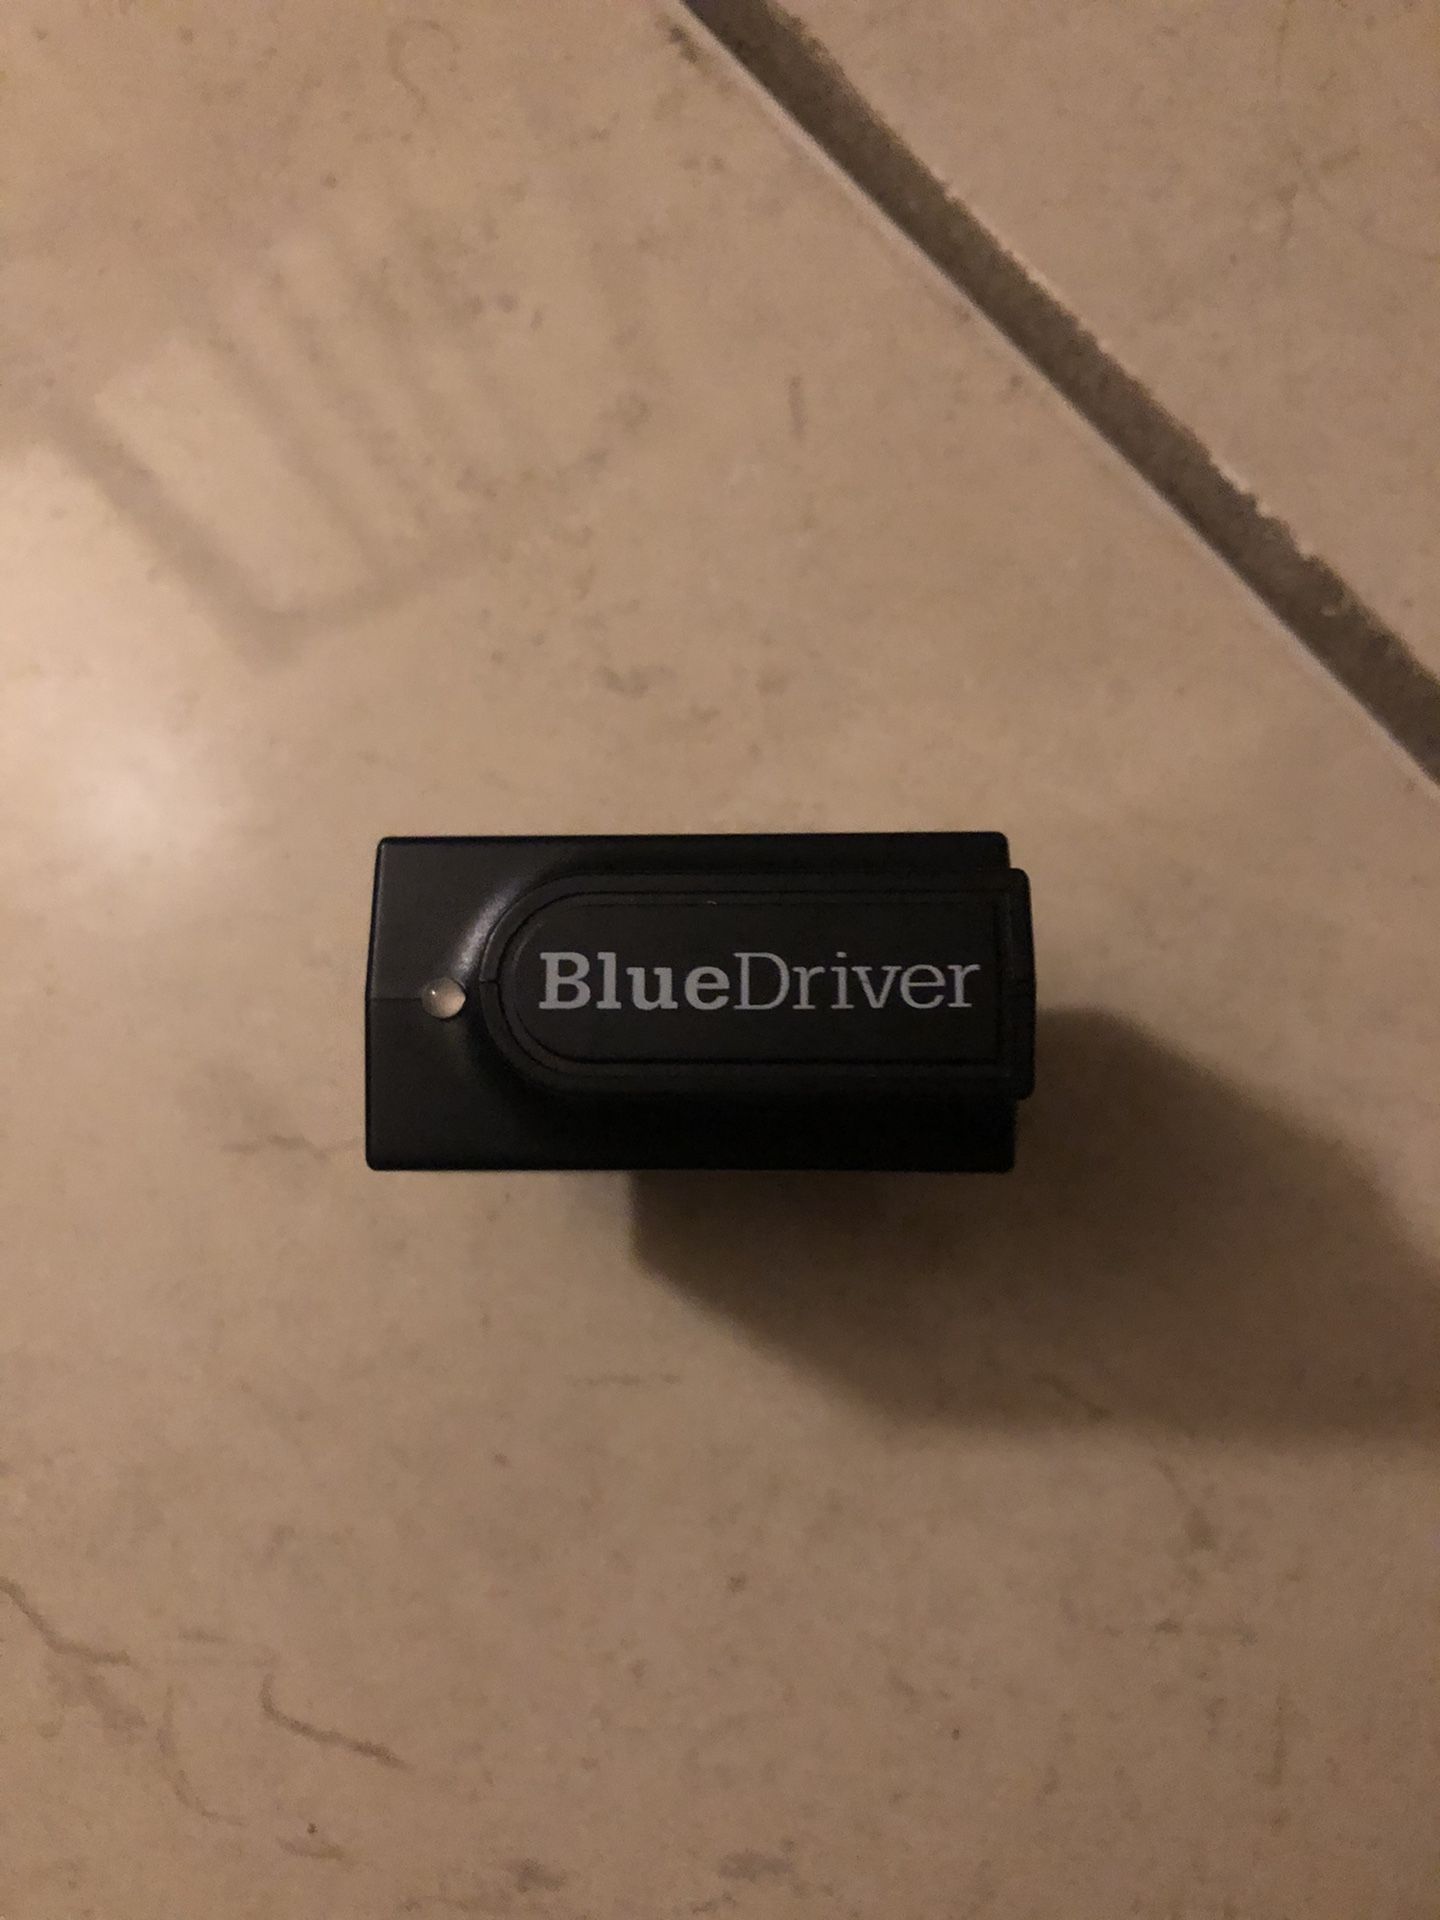 BlueDriver Bluetooth Pro OBDII Scan tool for iPhone/Android